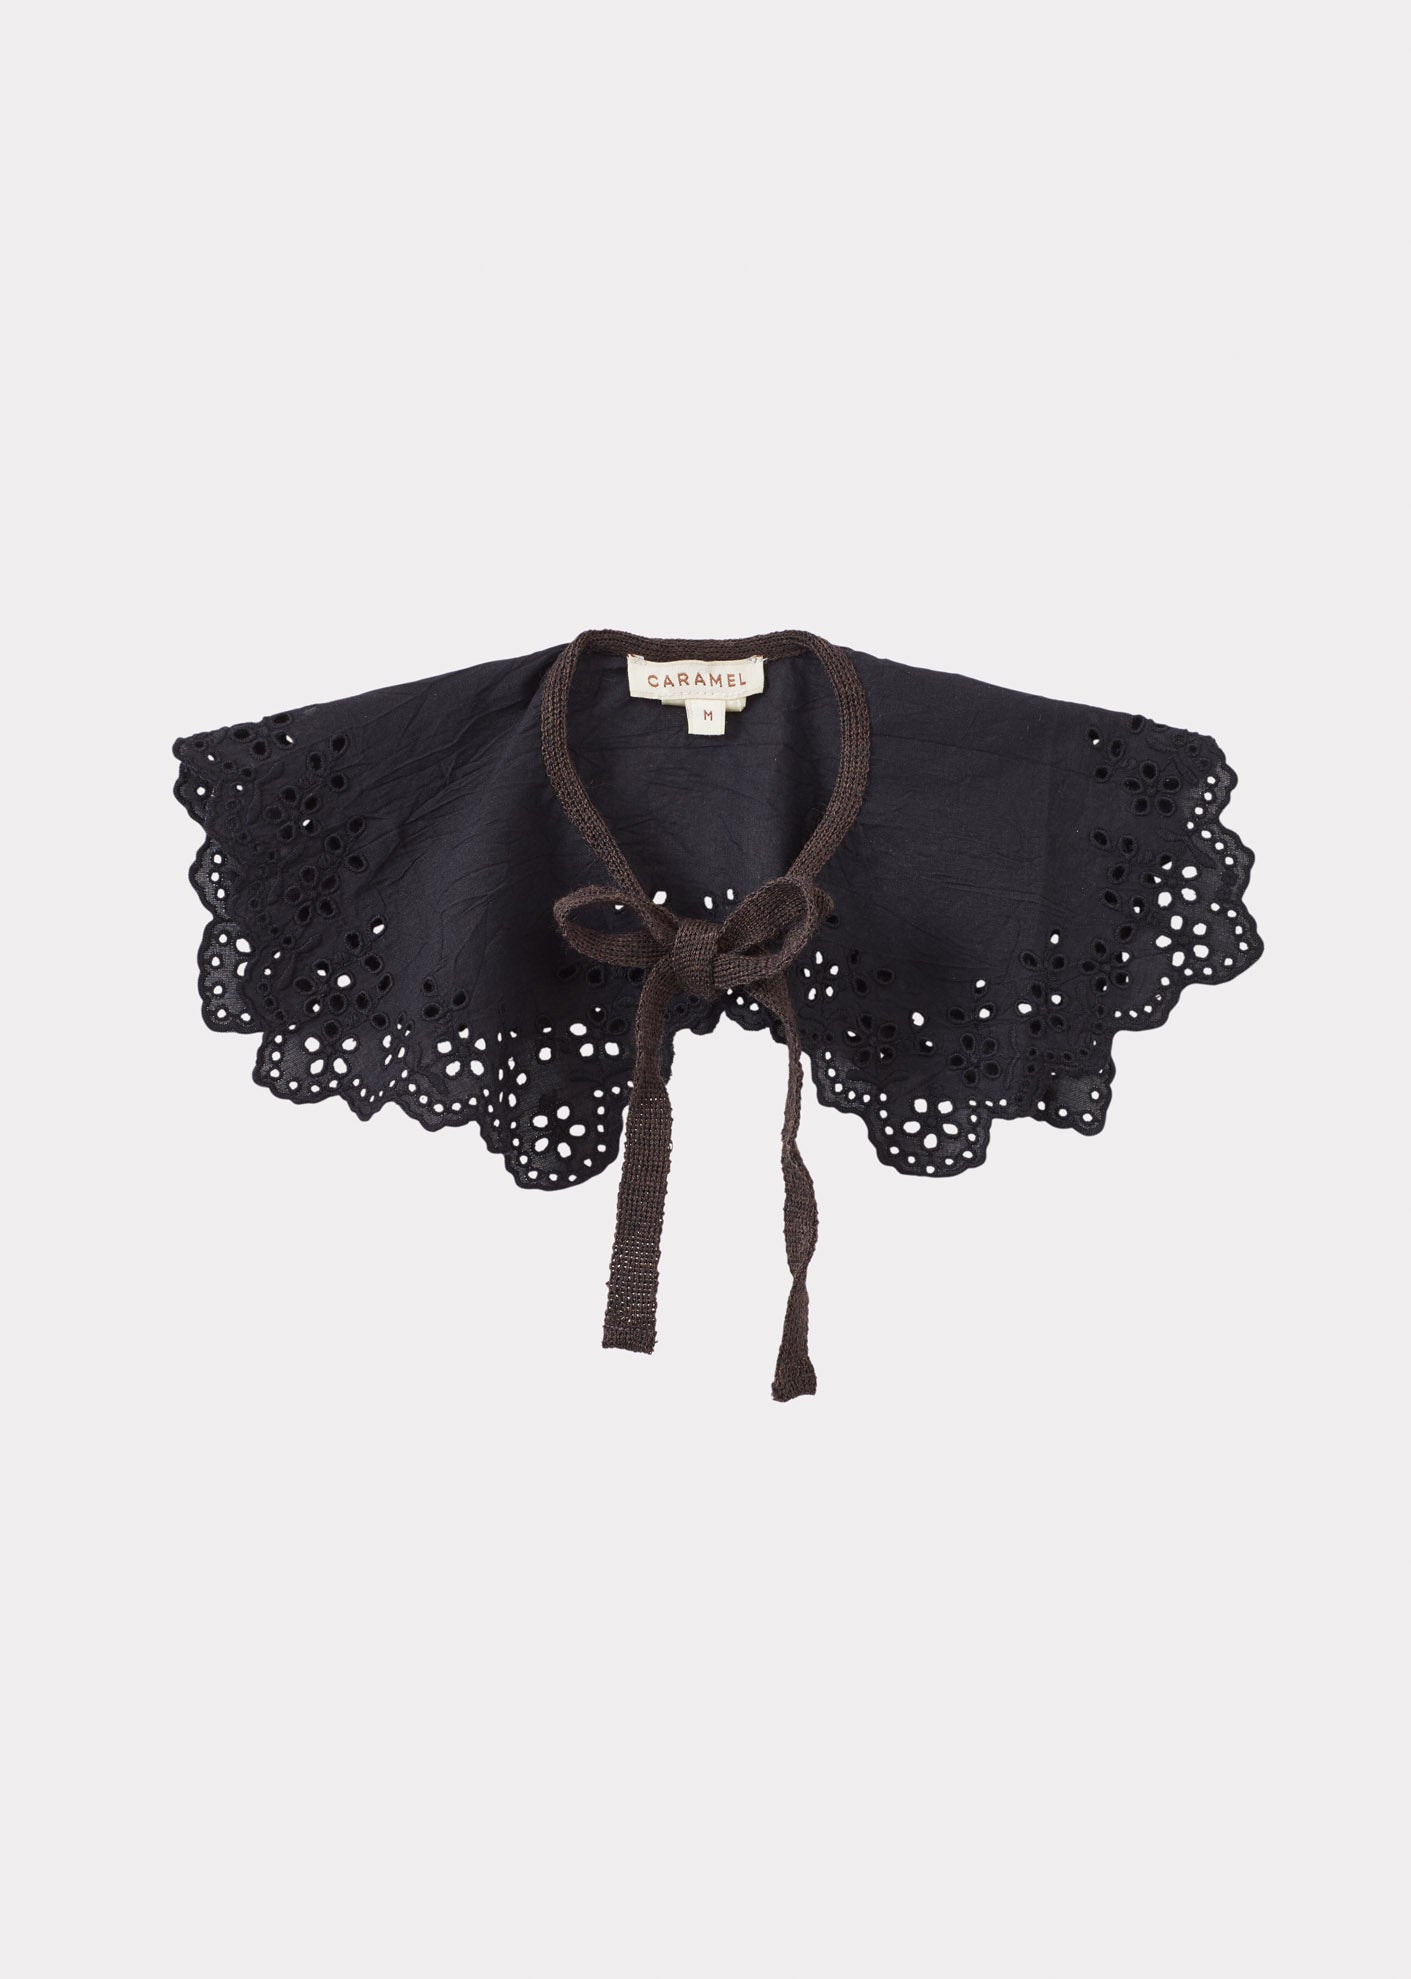 EMBROIDERED KIDS COLLAR - BLACK BRODERIE ANGLAISE